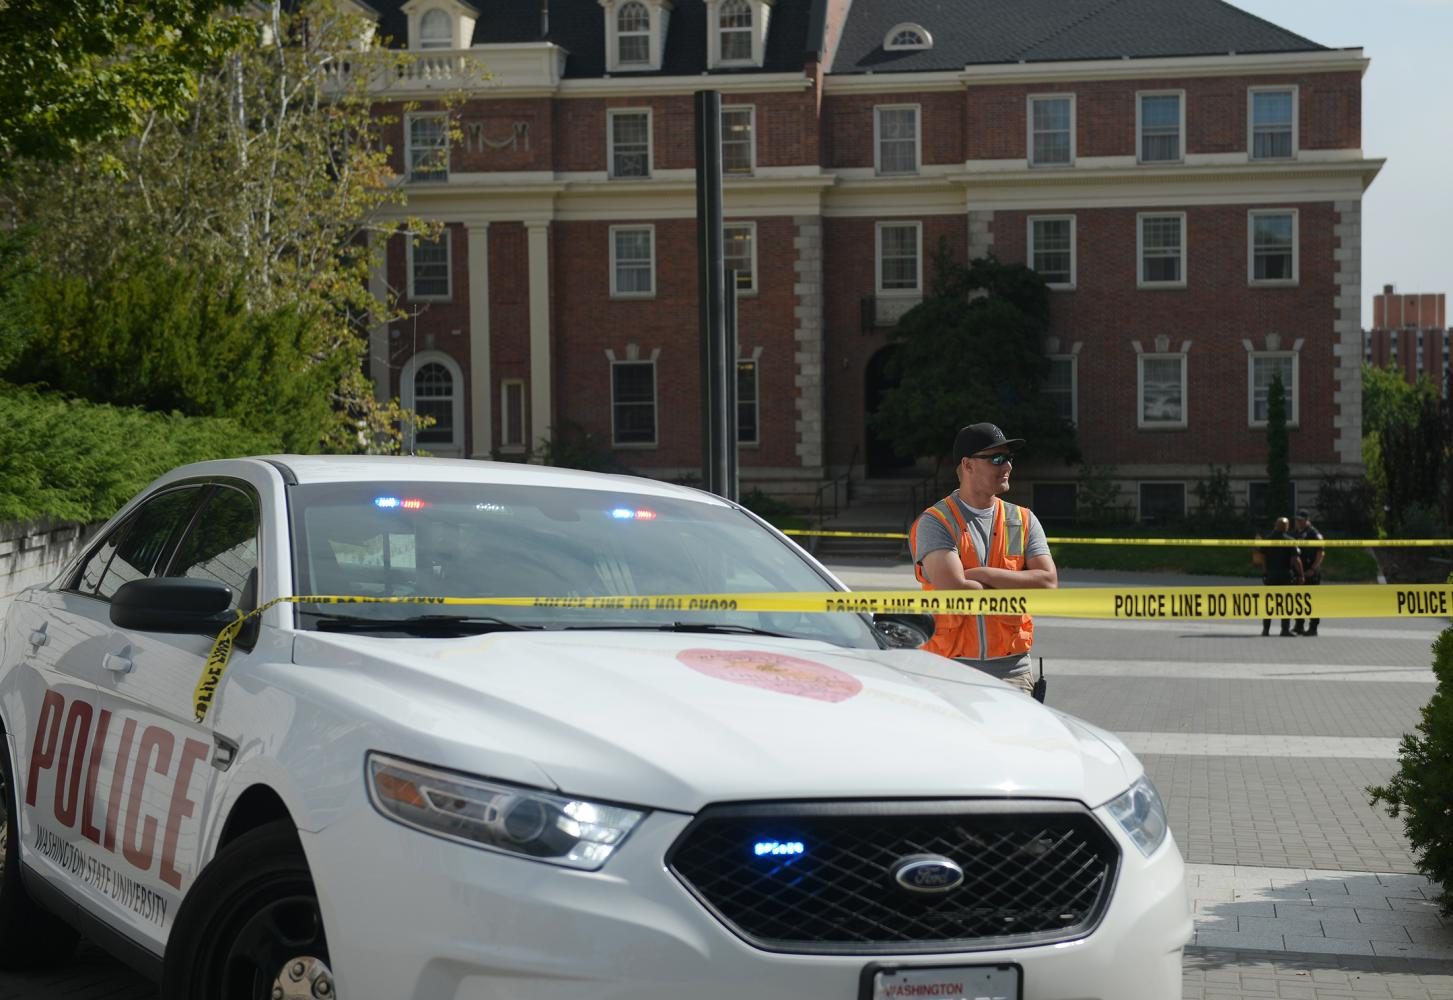 A WSU police car parked outside Stimson Hall, which was evacuated and cordoned off following the second bomb threat to the building in three days.